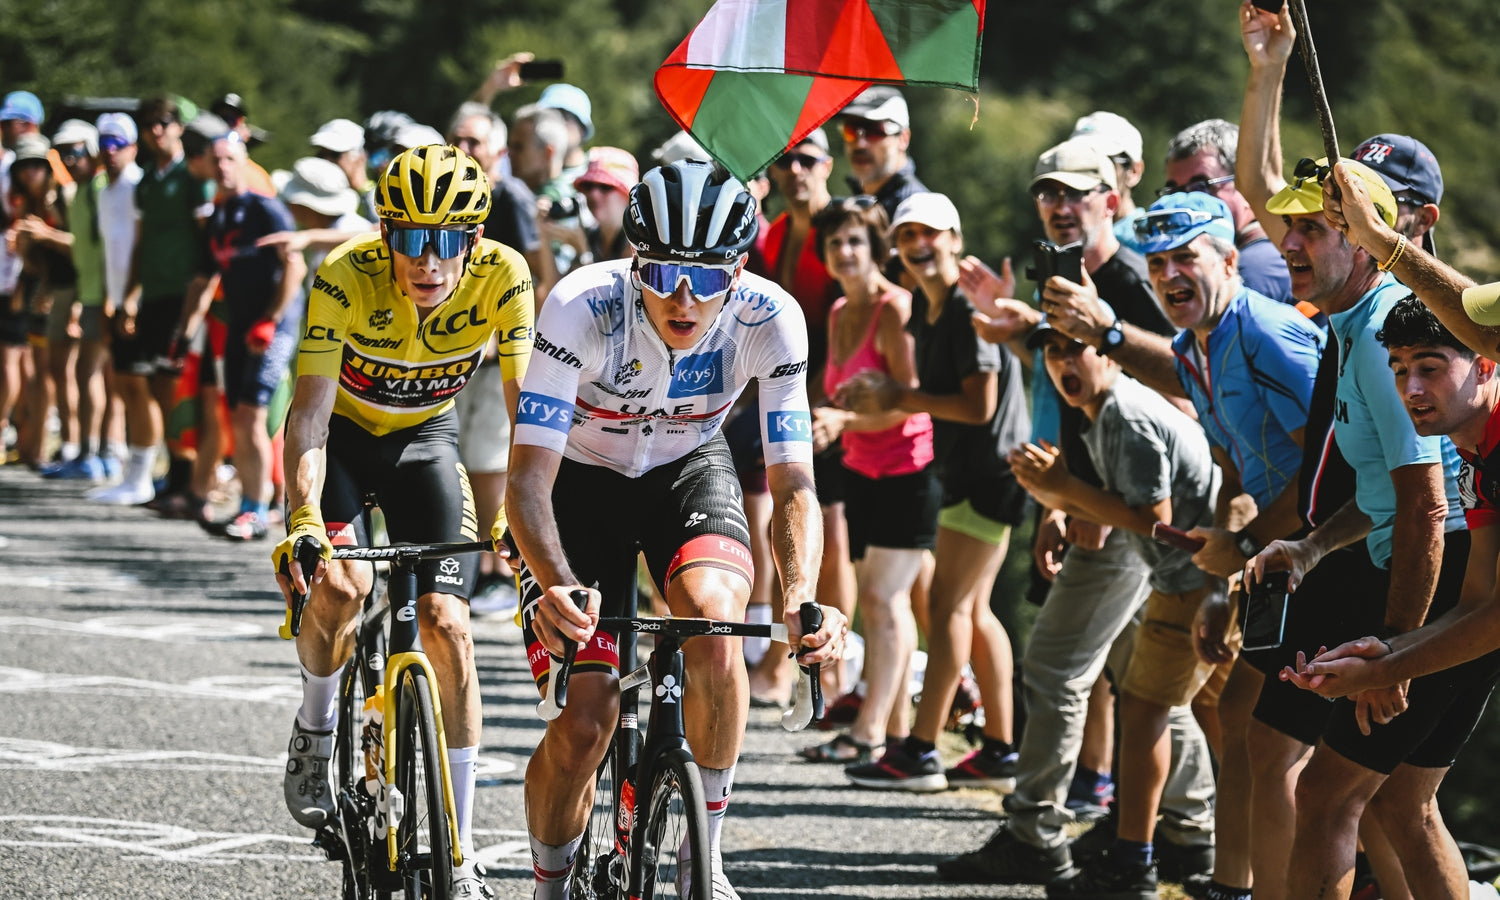 What to watch after the Tour de France